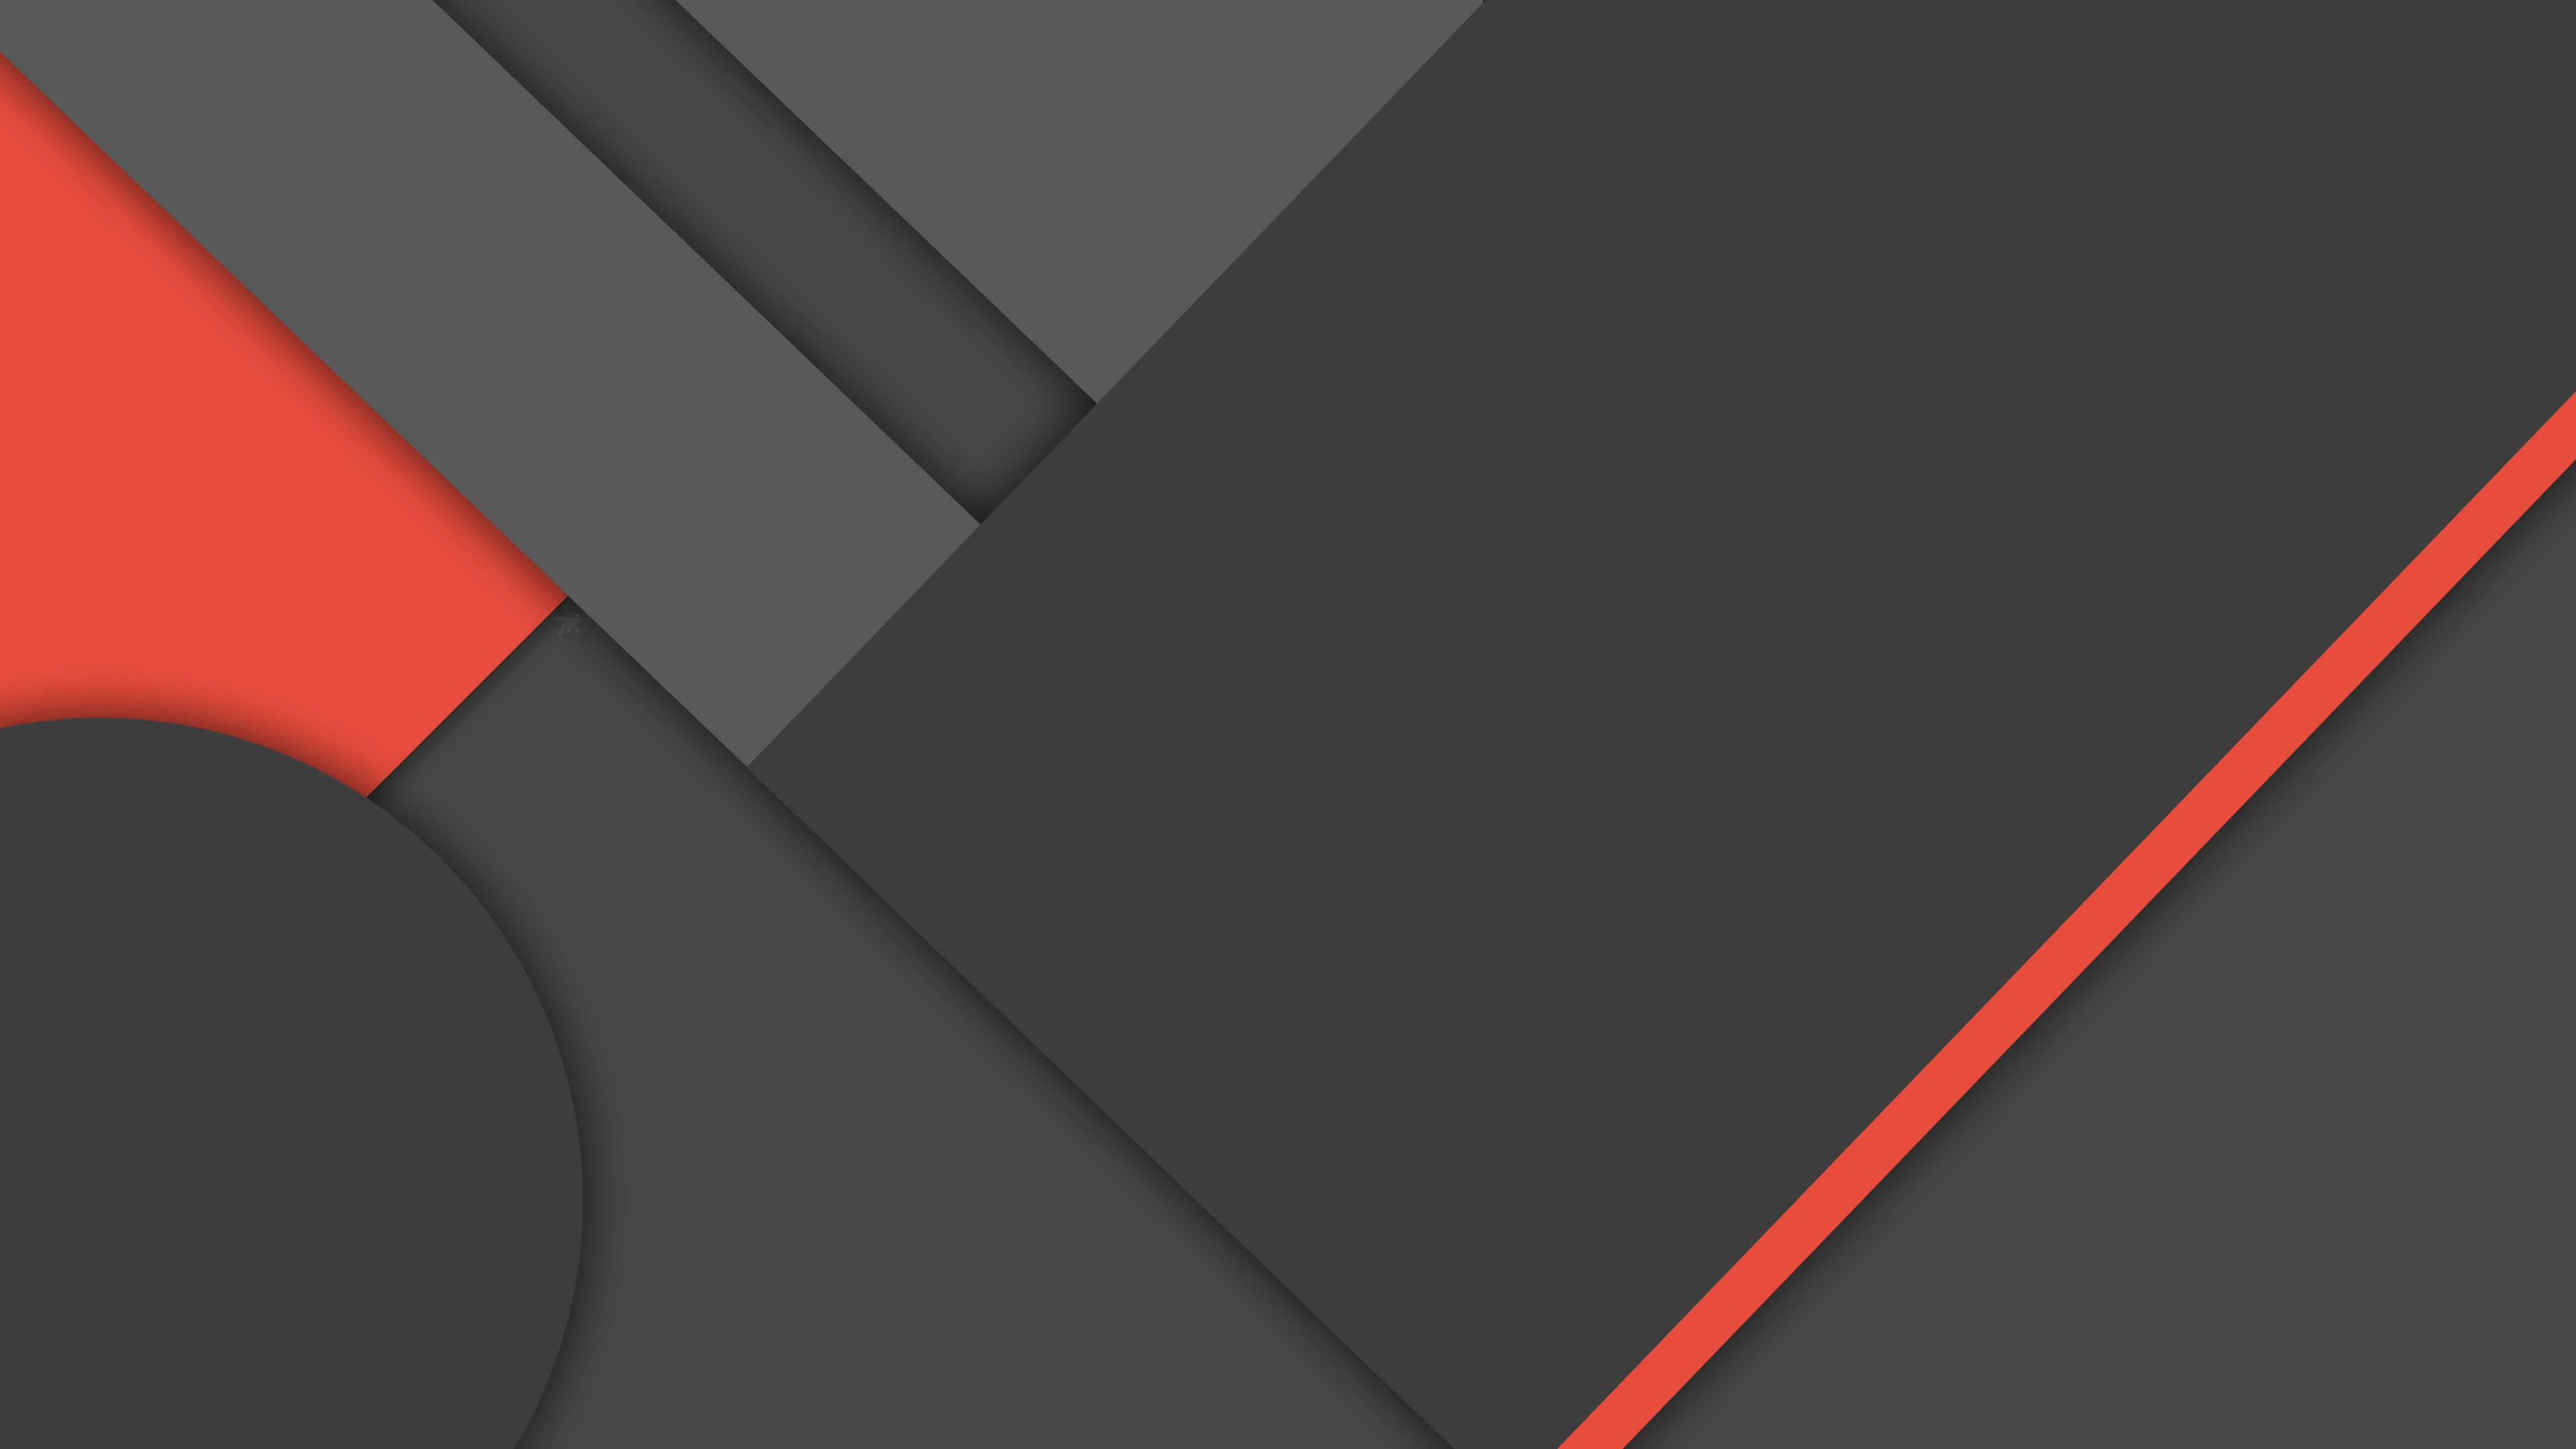 Dark Grey Red Material Design 4 K Wallpaper, Free Download, Borrow, and Streaming, Internet Archive